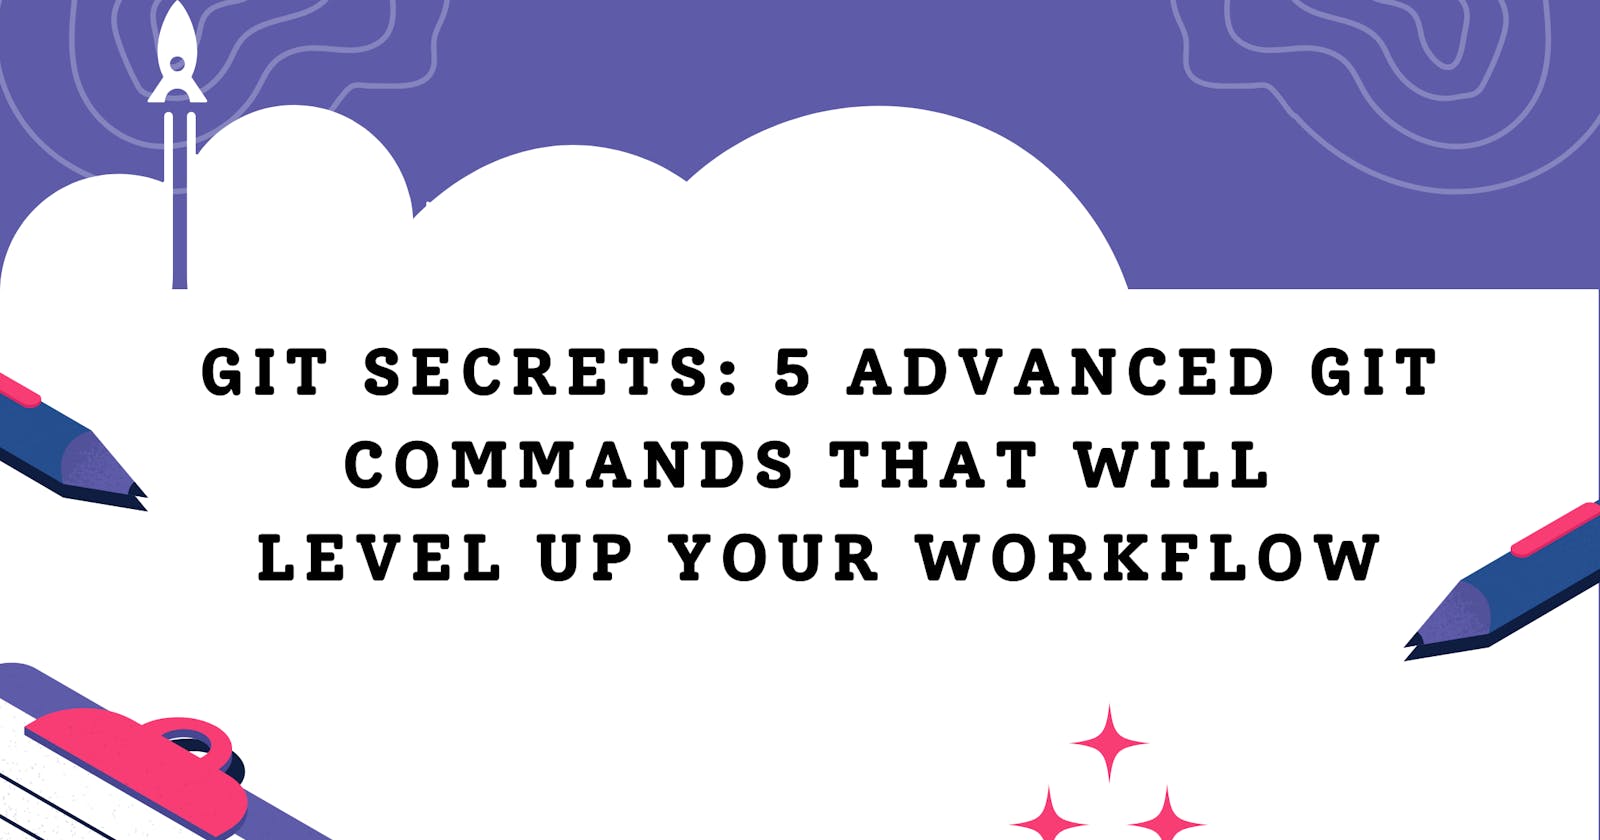 Git Secrets: 5 advanced git commands that will level up your workflow